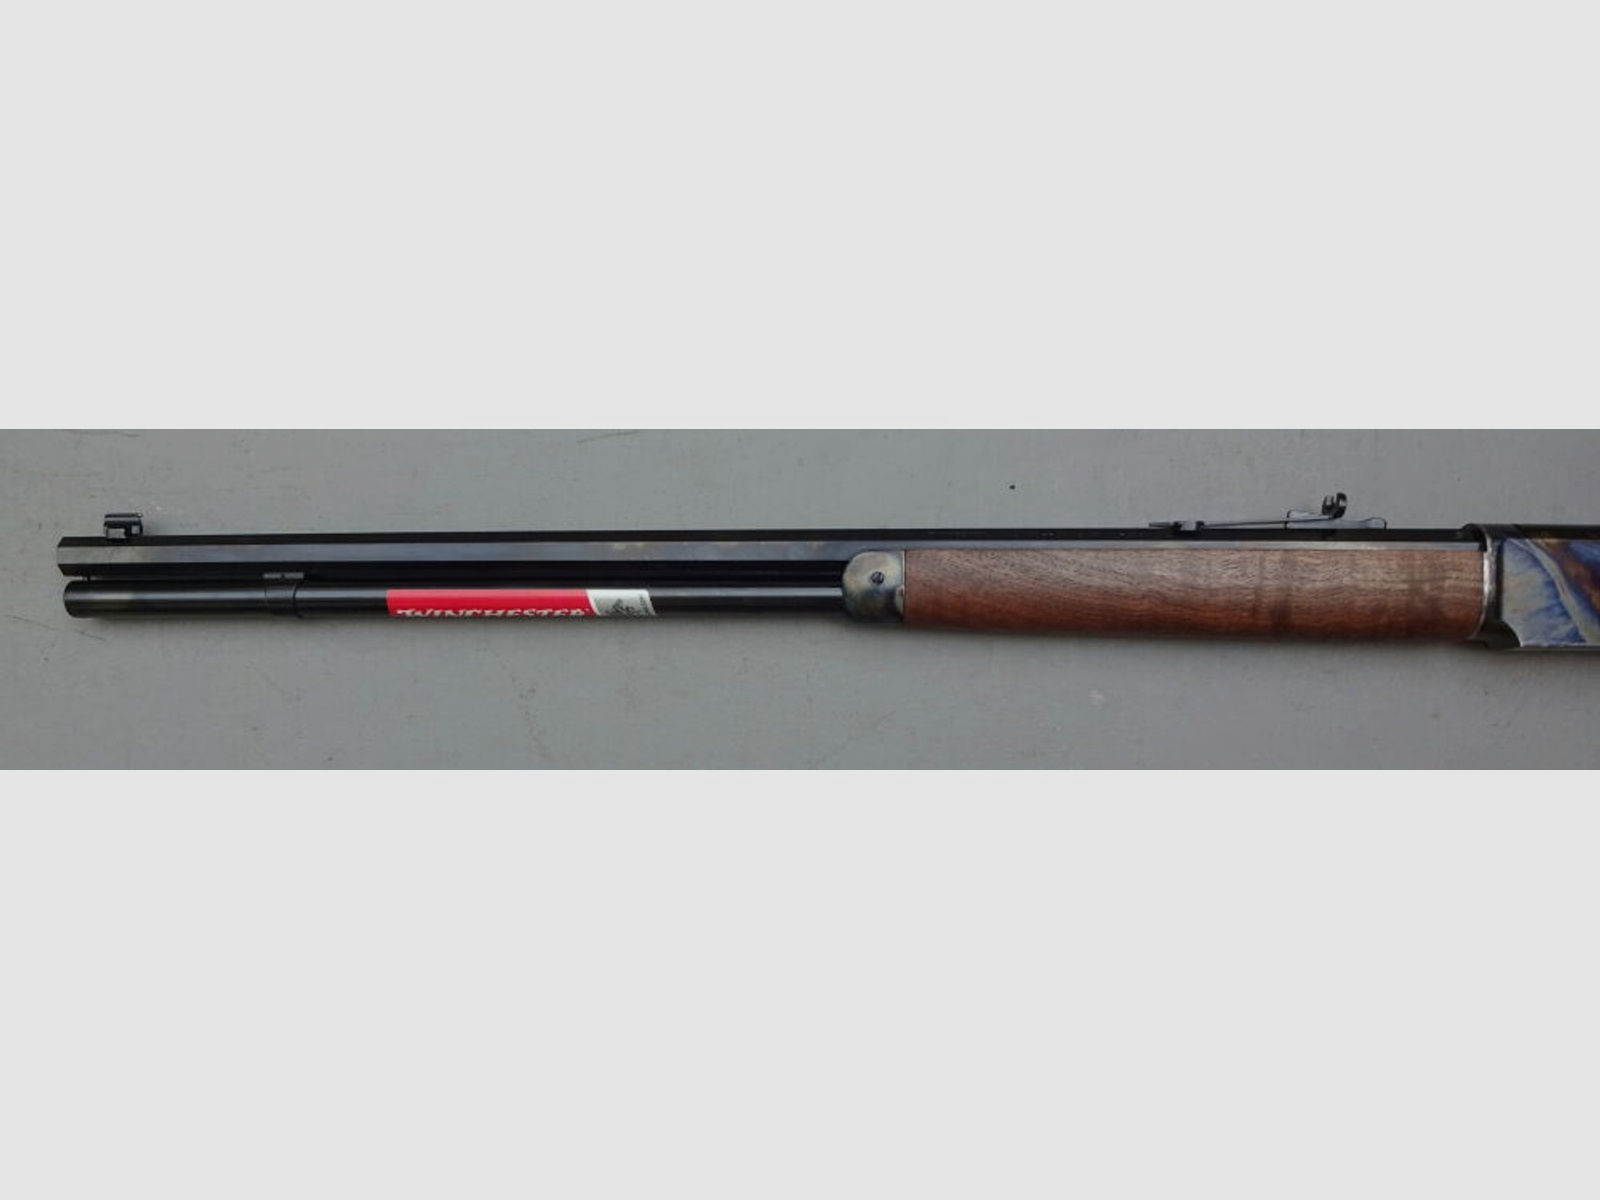 WINCHESTER ARMS	 Mod. 1873 Sporter - 8-kant Lauf 24"